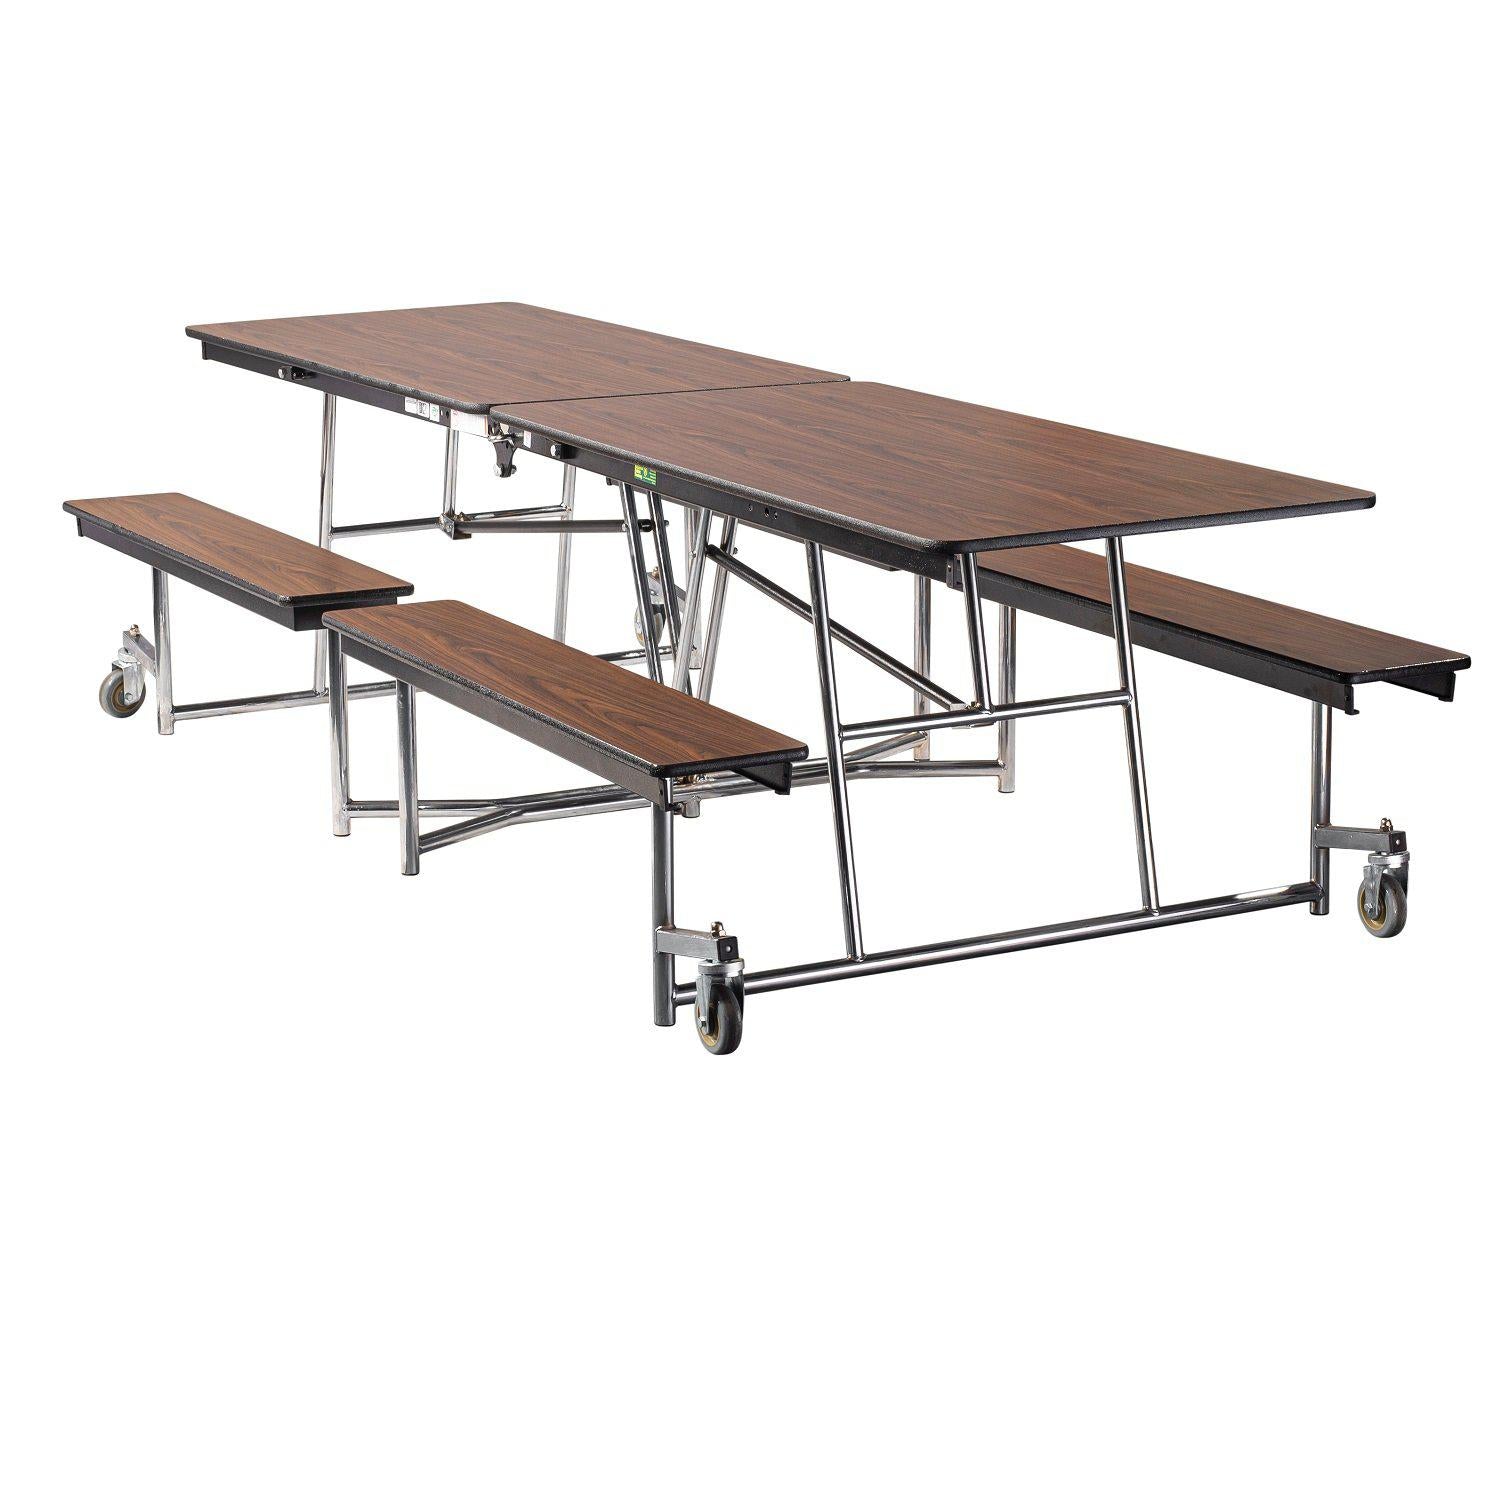 Mobile Cafeteria Table with Benches, 10'L, Plywood Core, Vinyl T-Mold Edge, Chrome Frame